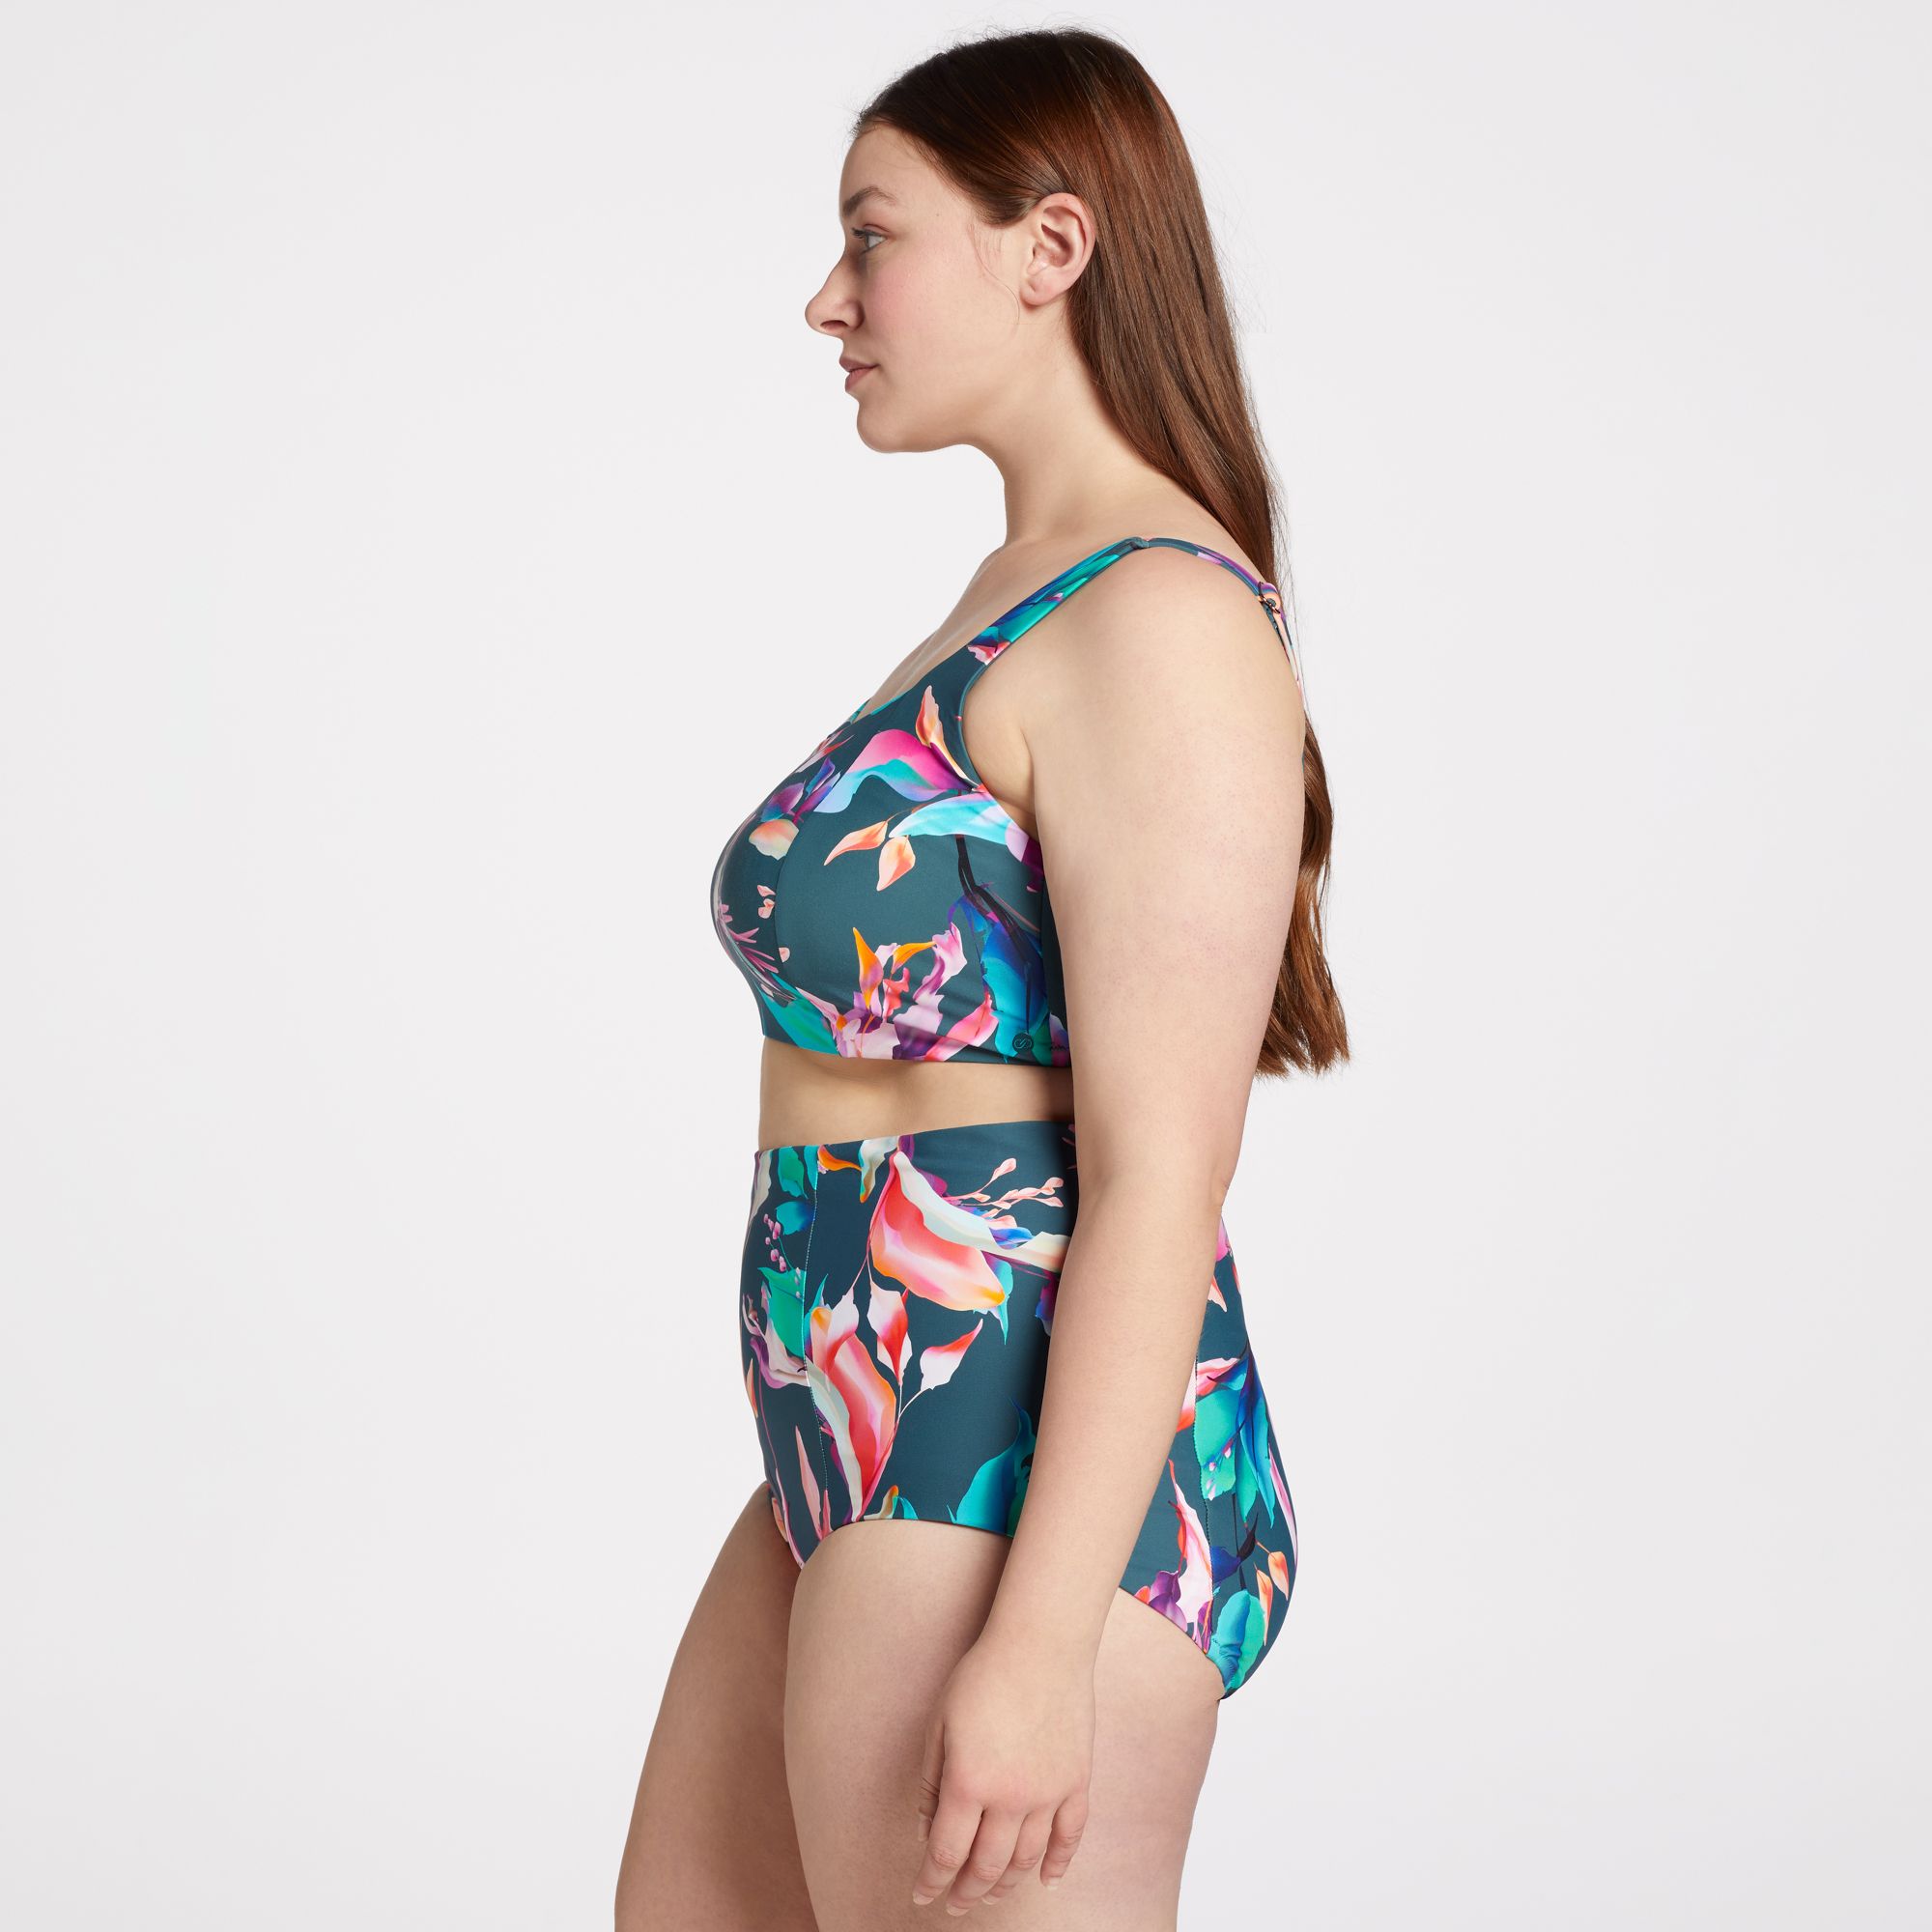 Women's Athletic Swimsuits  Best Price Guarantee at DICK'S